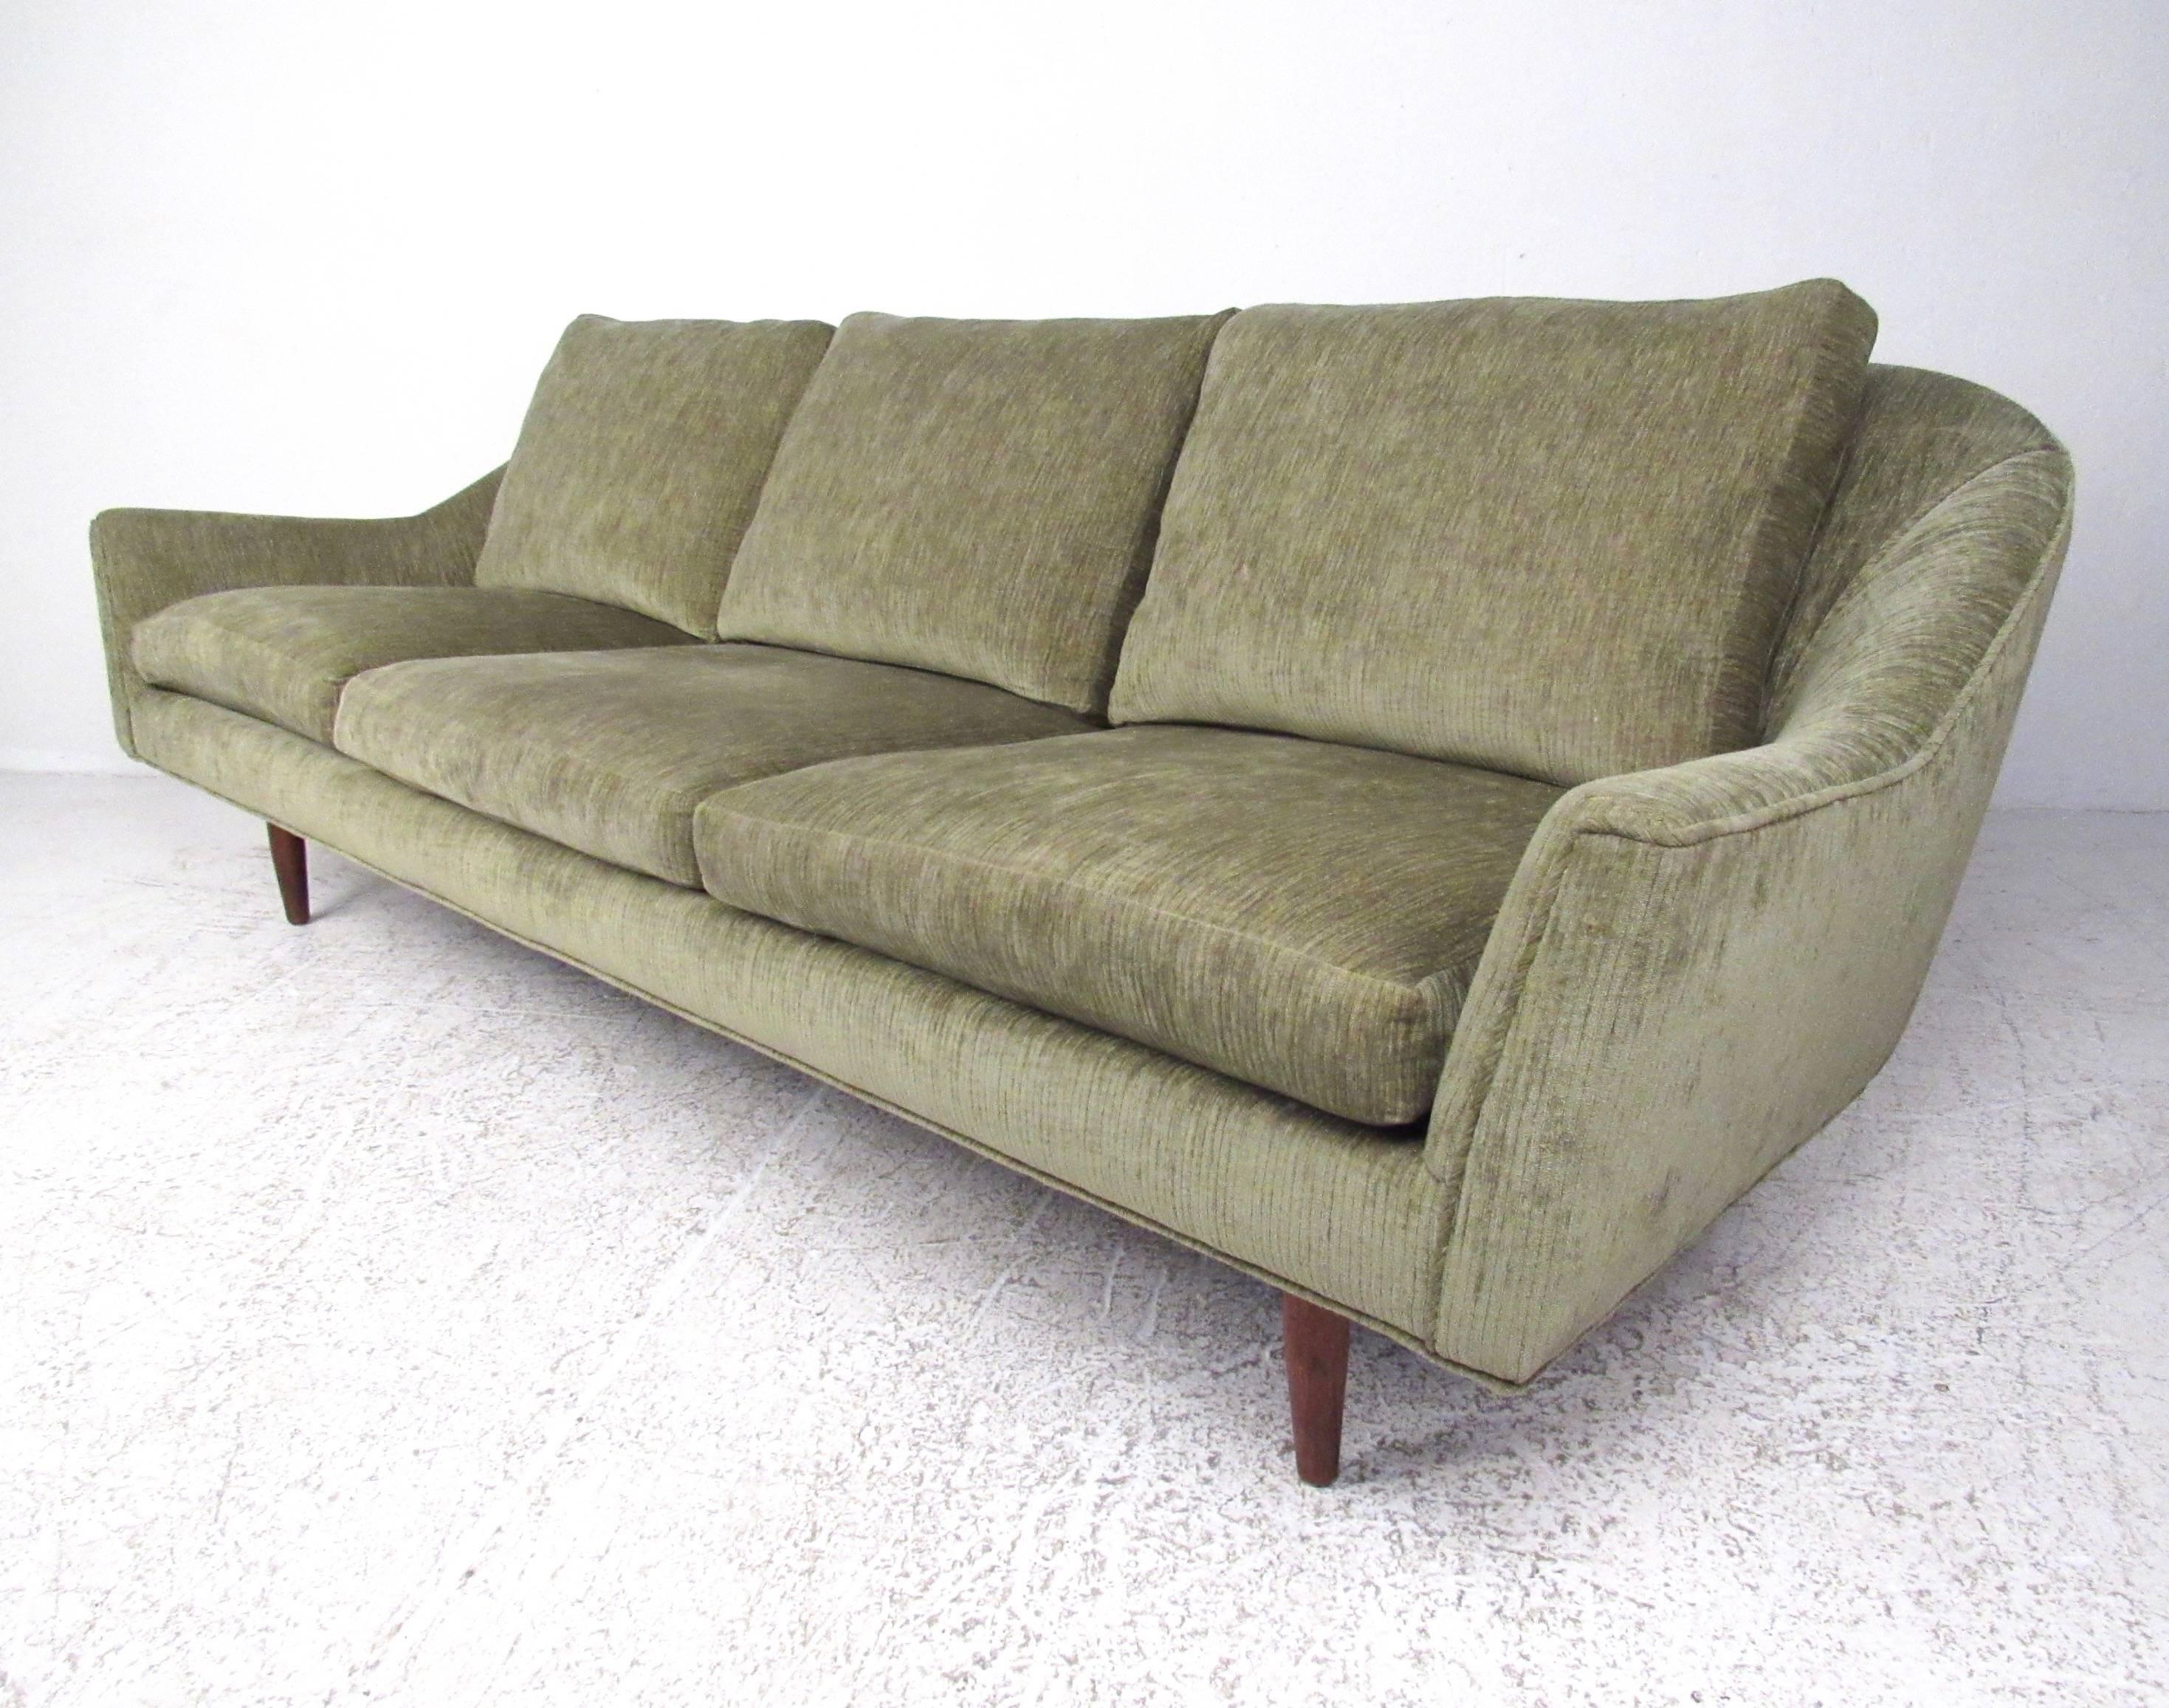 This stylish three-seat sofa features the Mid-Century Modern design of Jens Risom while featuring updated upholstery. Sturdy teak base adds to the Scandinavian Modern appeal of this spacious and comfortable sofa. Please confirm item location (NY or